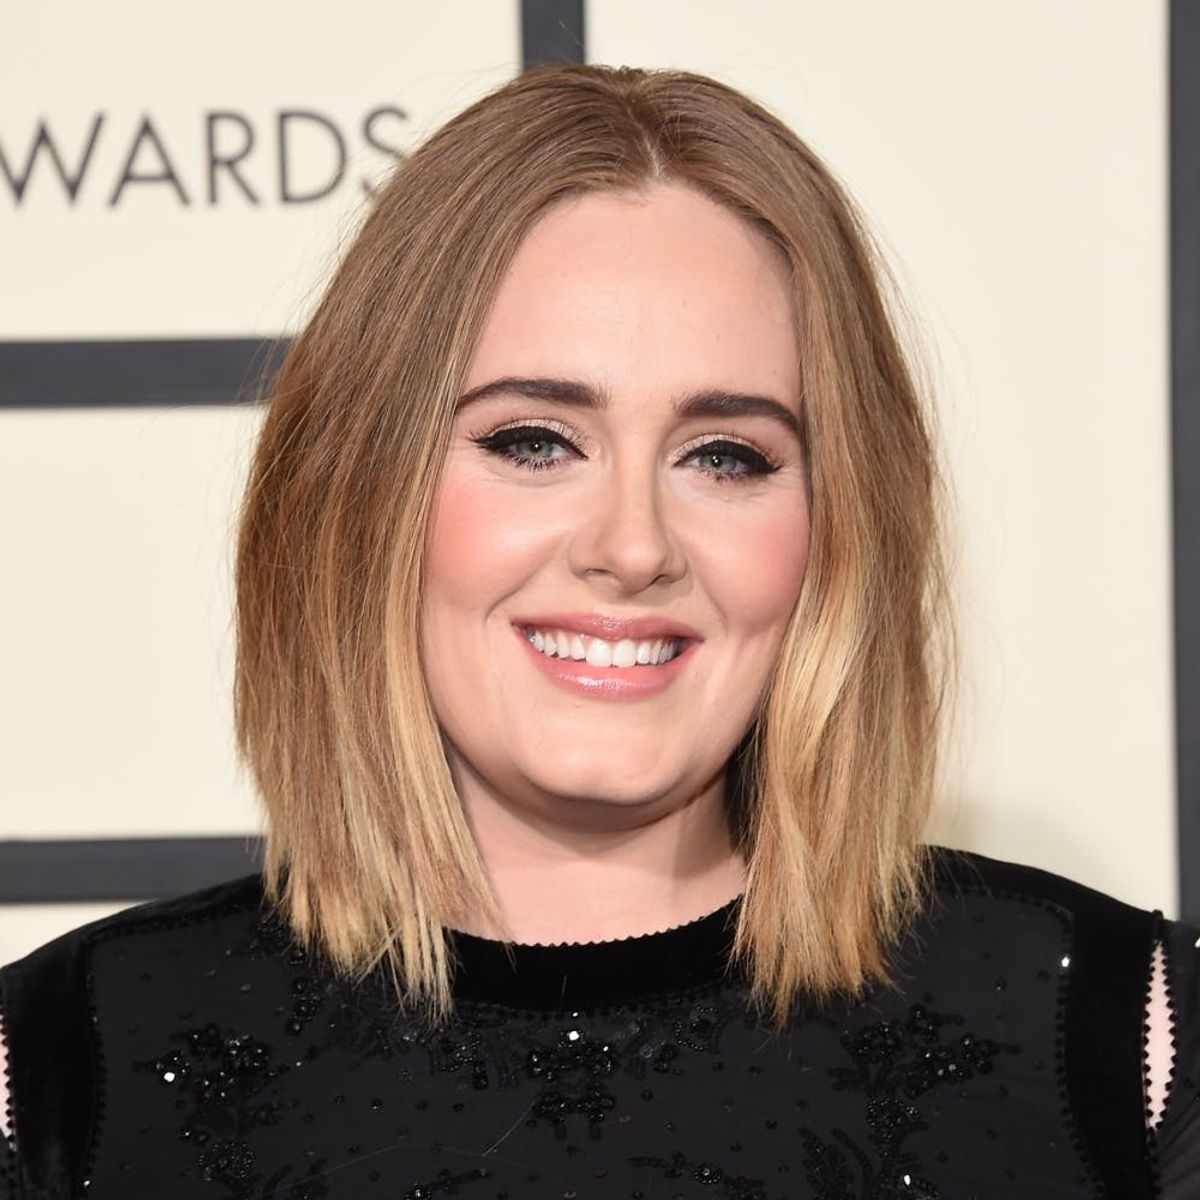 This Is the Exciting Way Adele Plans to Spend Her Time Off from Touring